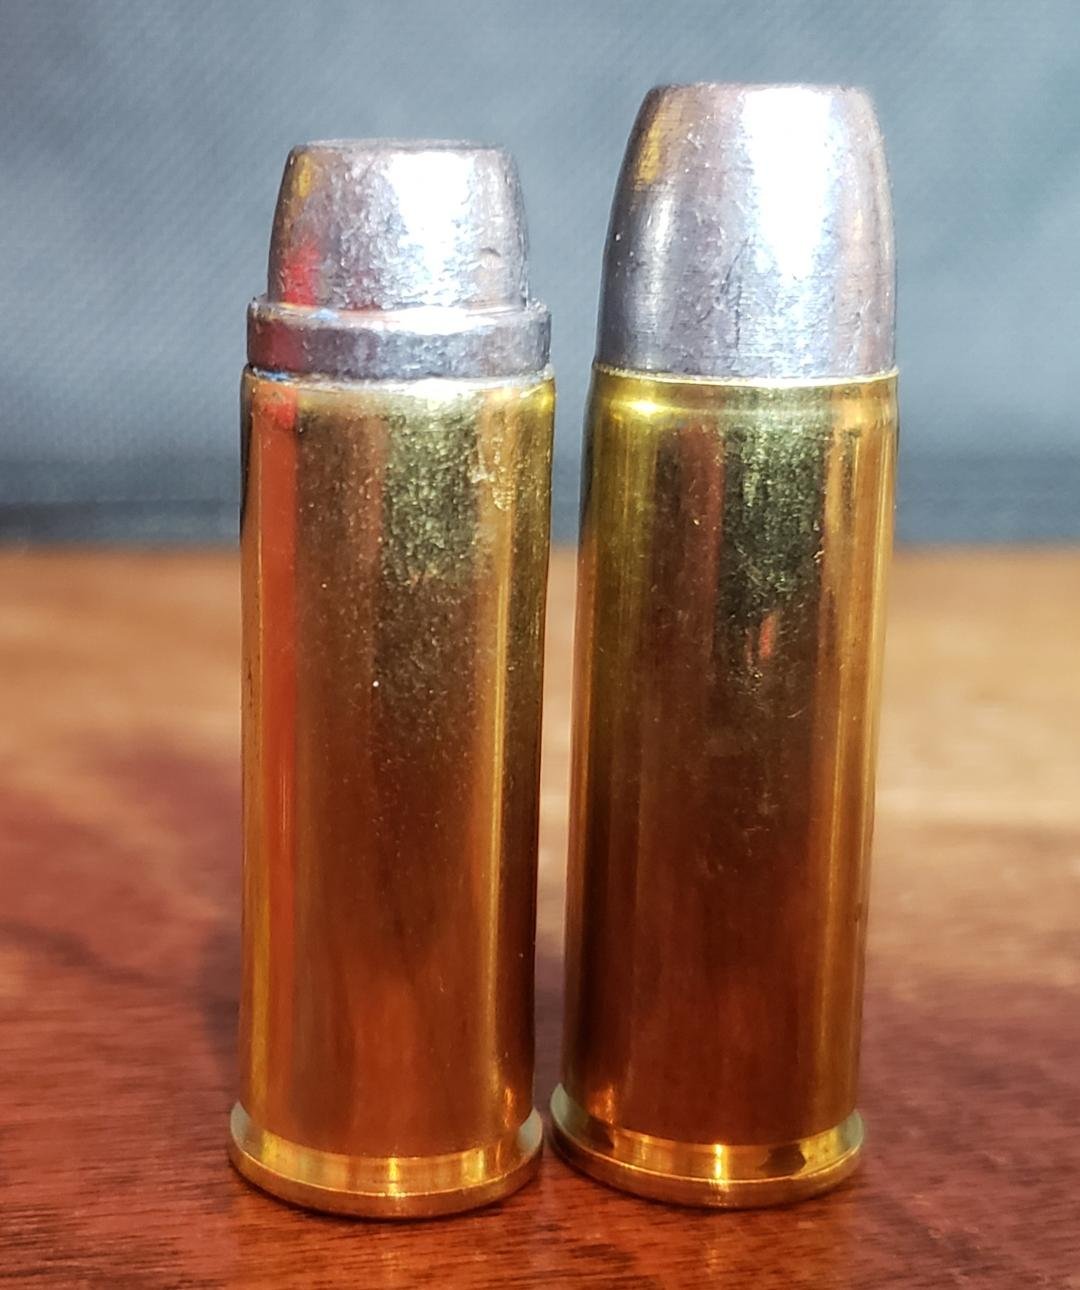 My 255 grainers on the left compared to Buffalo Bore's ammo on the rig...